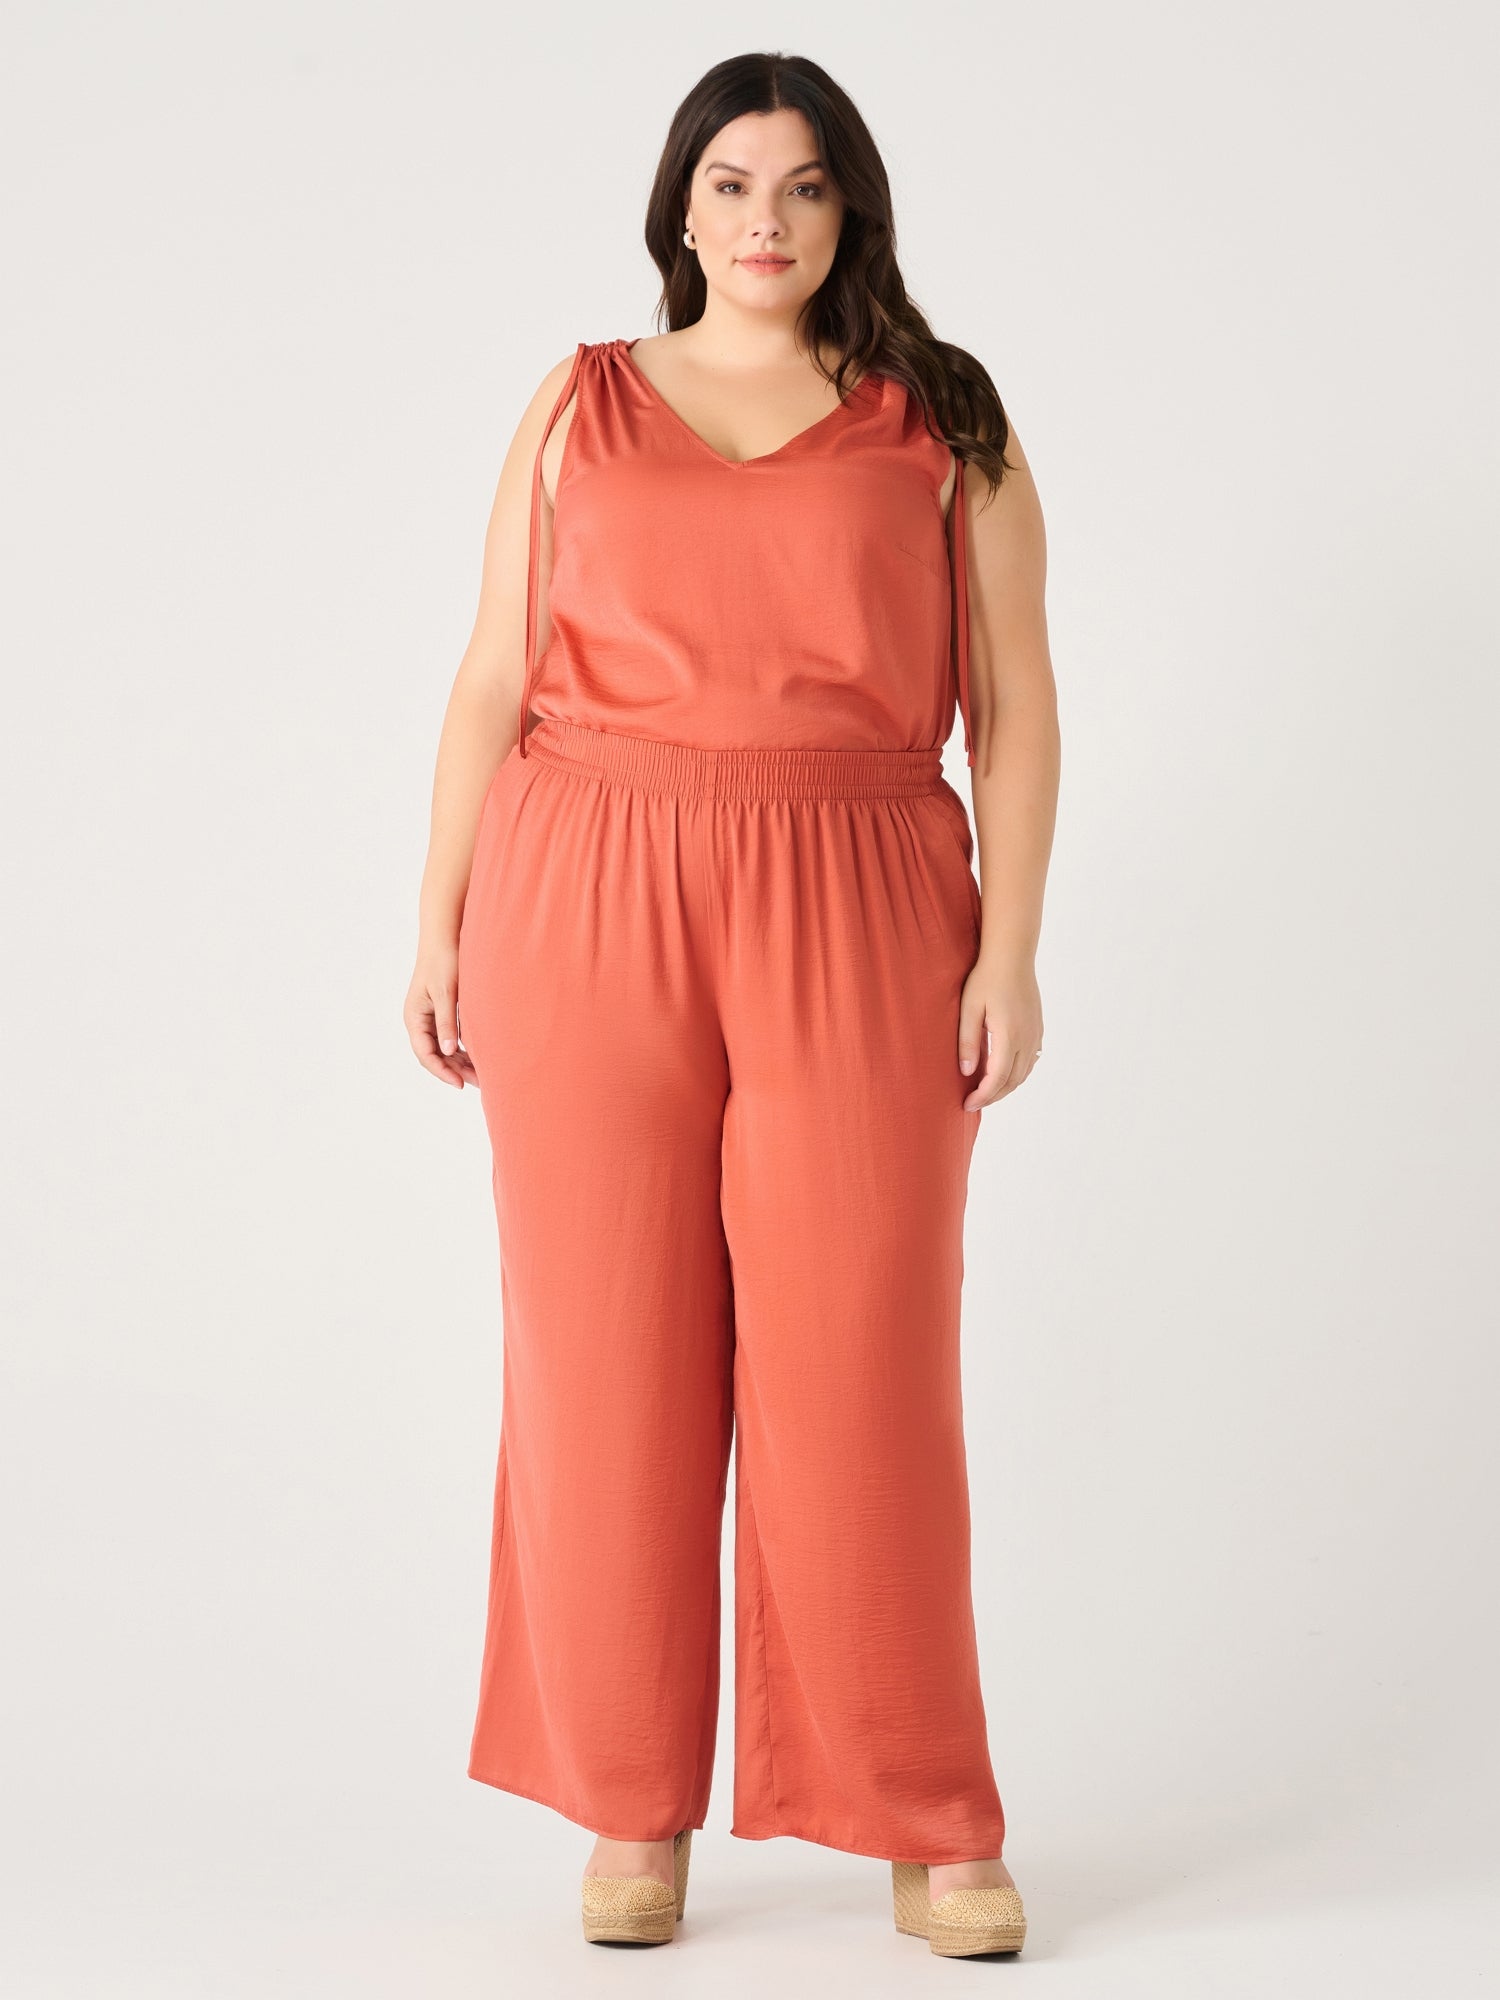 Wide Leg Copper Pants - Out of the Blue